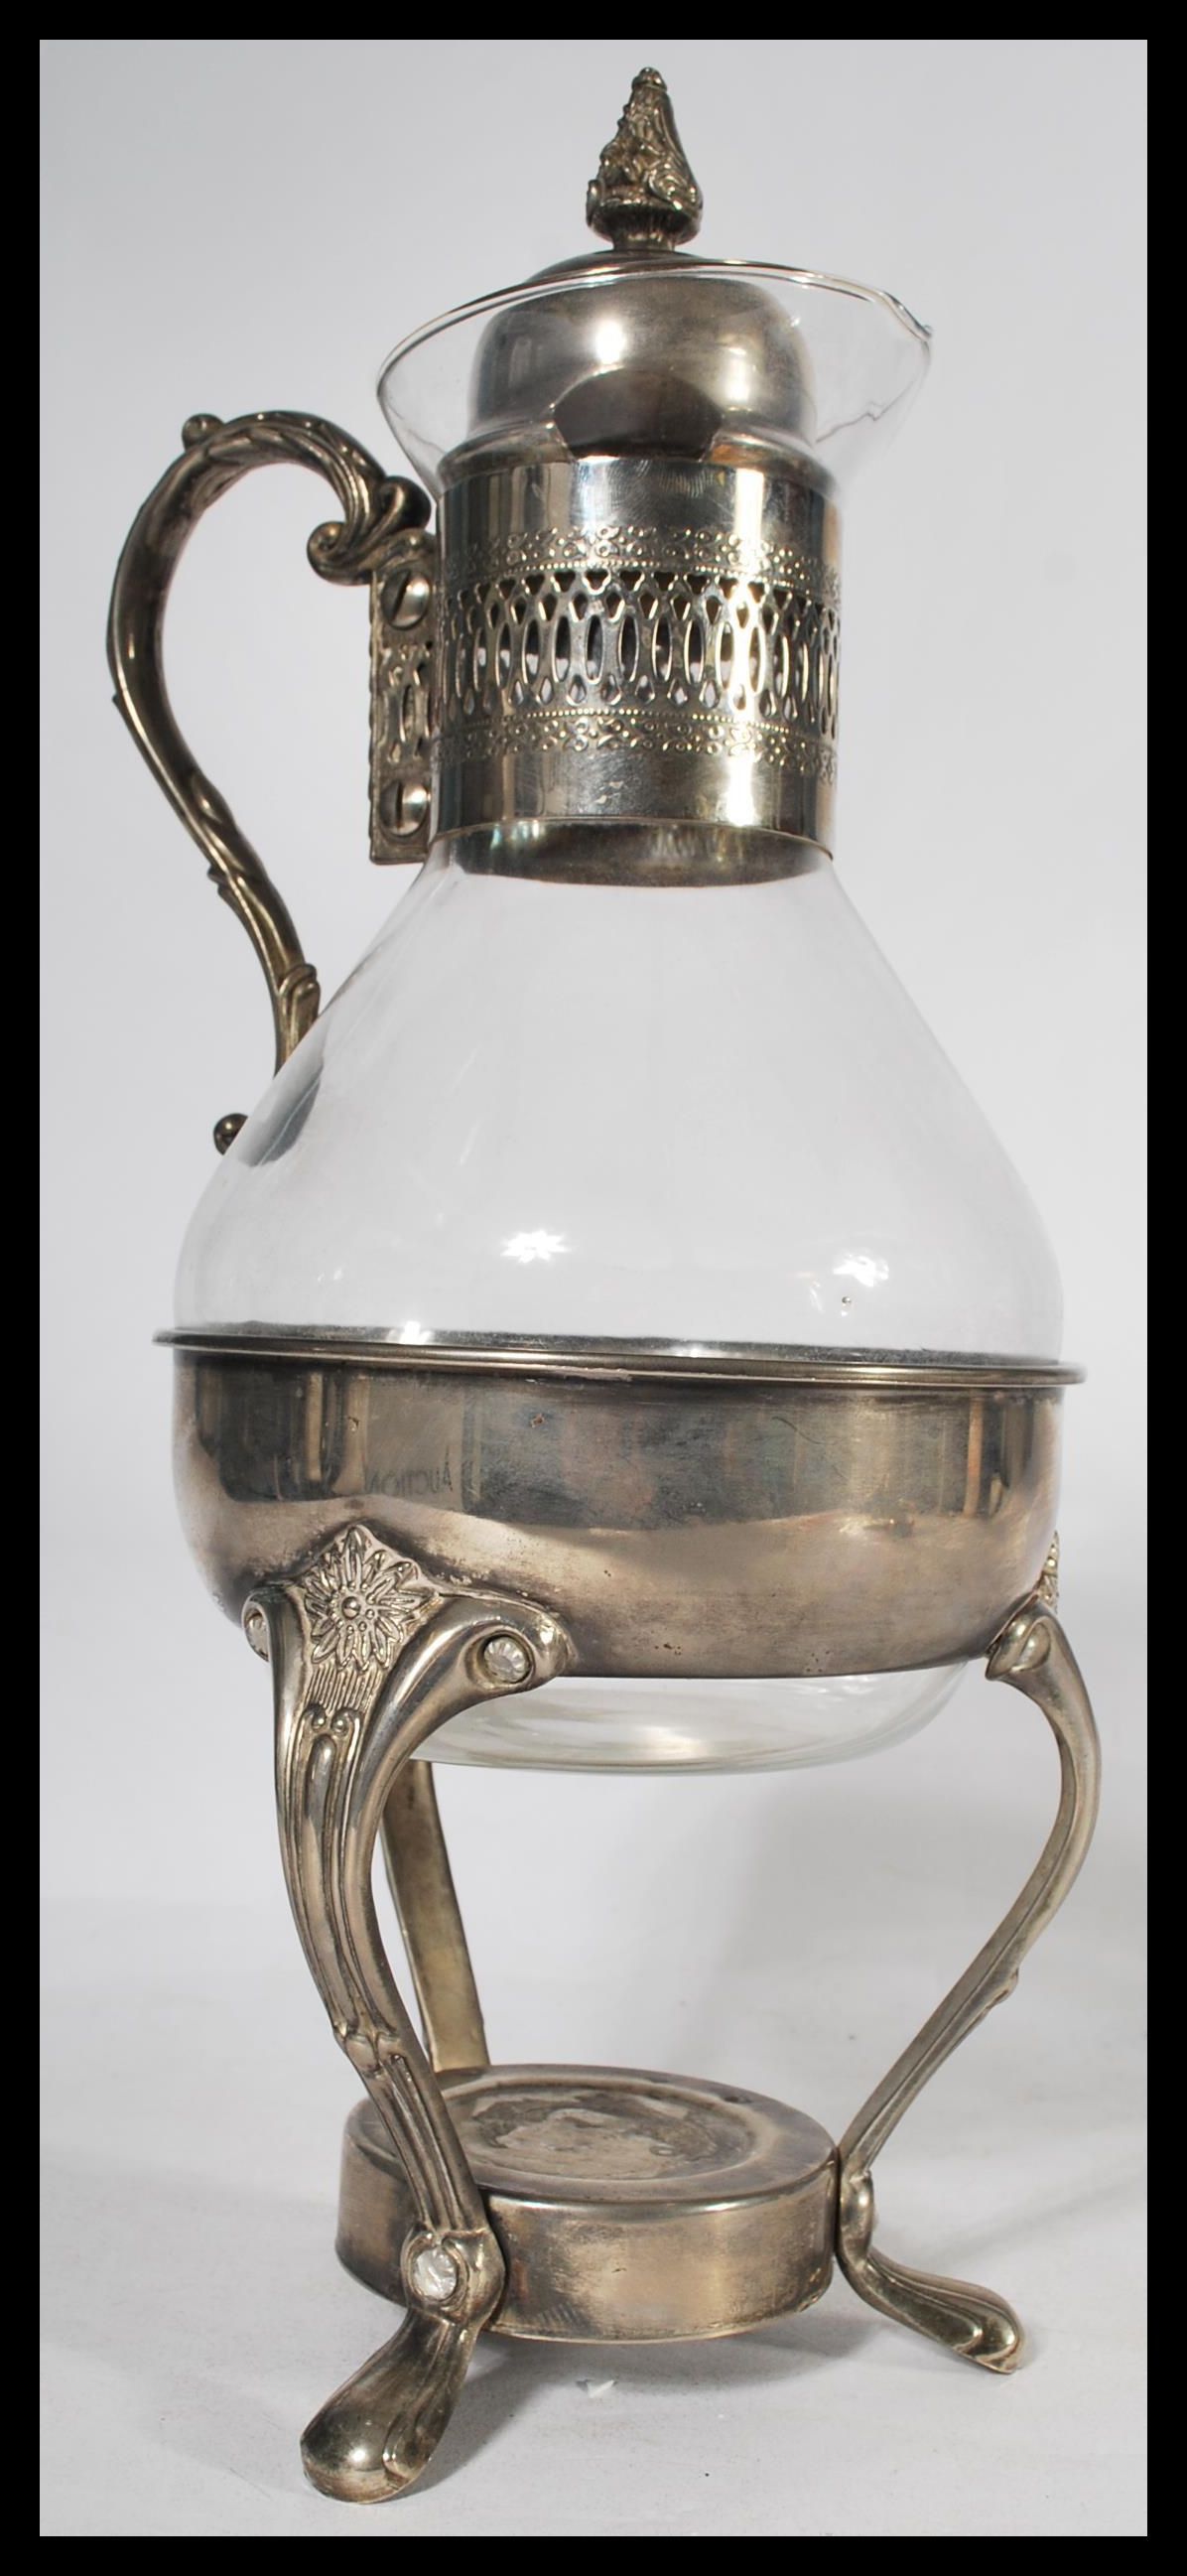 A vintage 20th Century silver plated and glass coffee carafe spirit warmer - Image 4 of 5